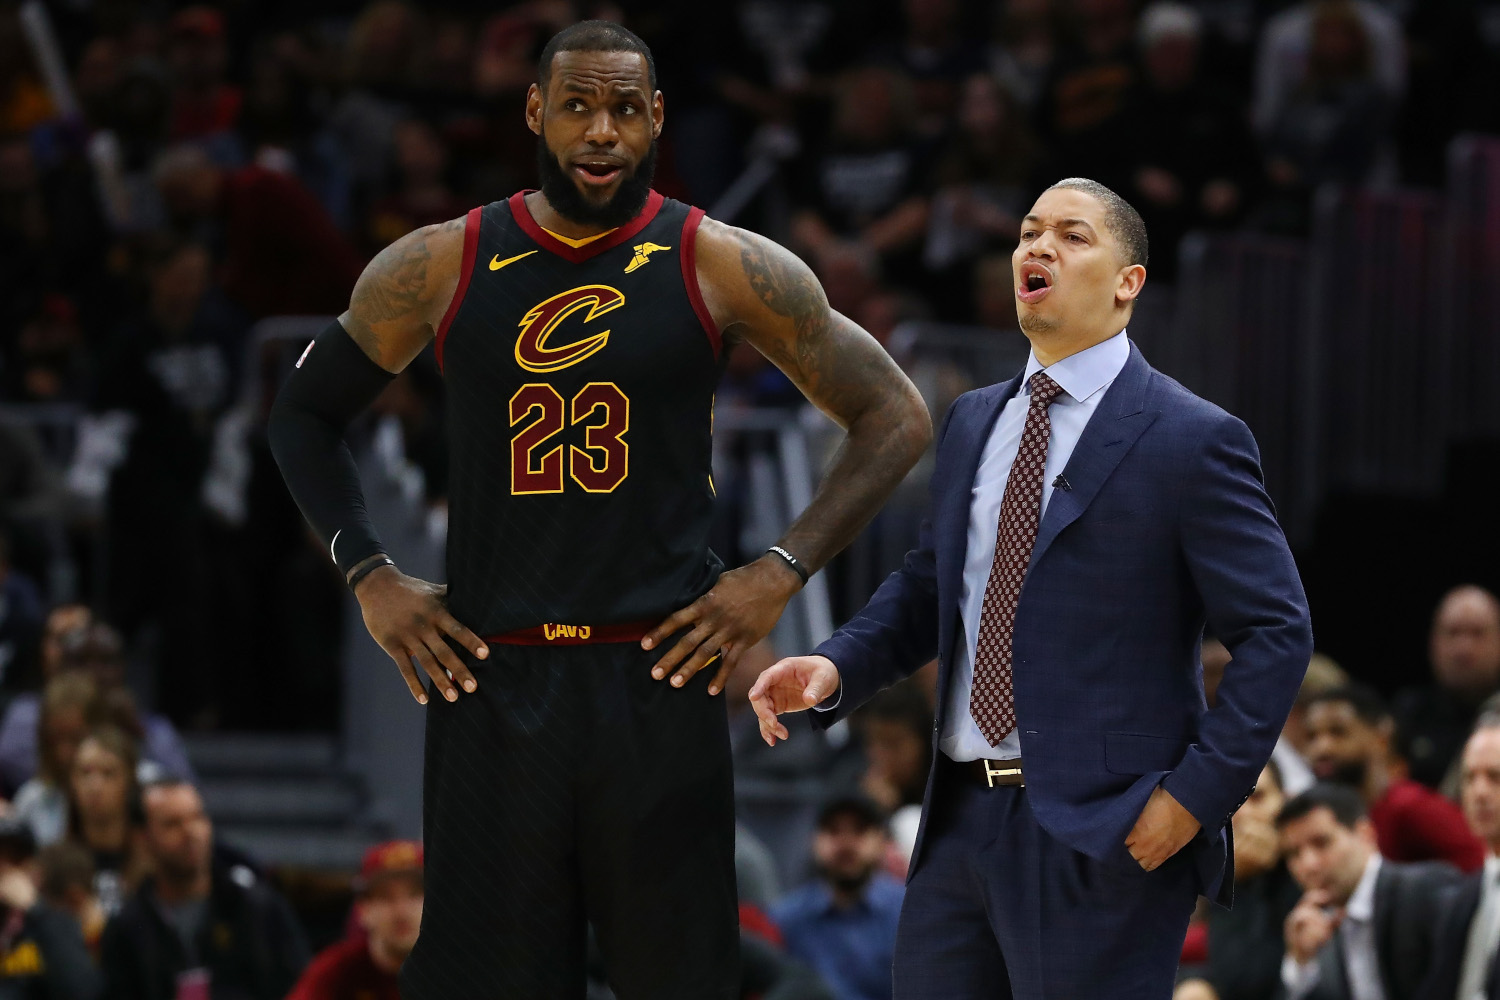 LA Clippers Coach Tyronn Lue Not Intimidated by Superstars; Just Ask LeBron James, Kyrie Irving